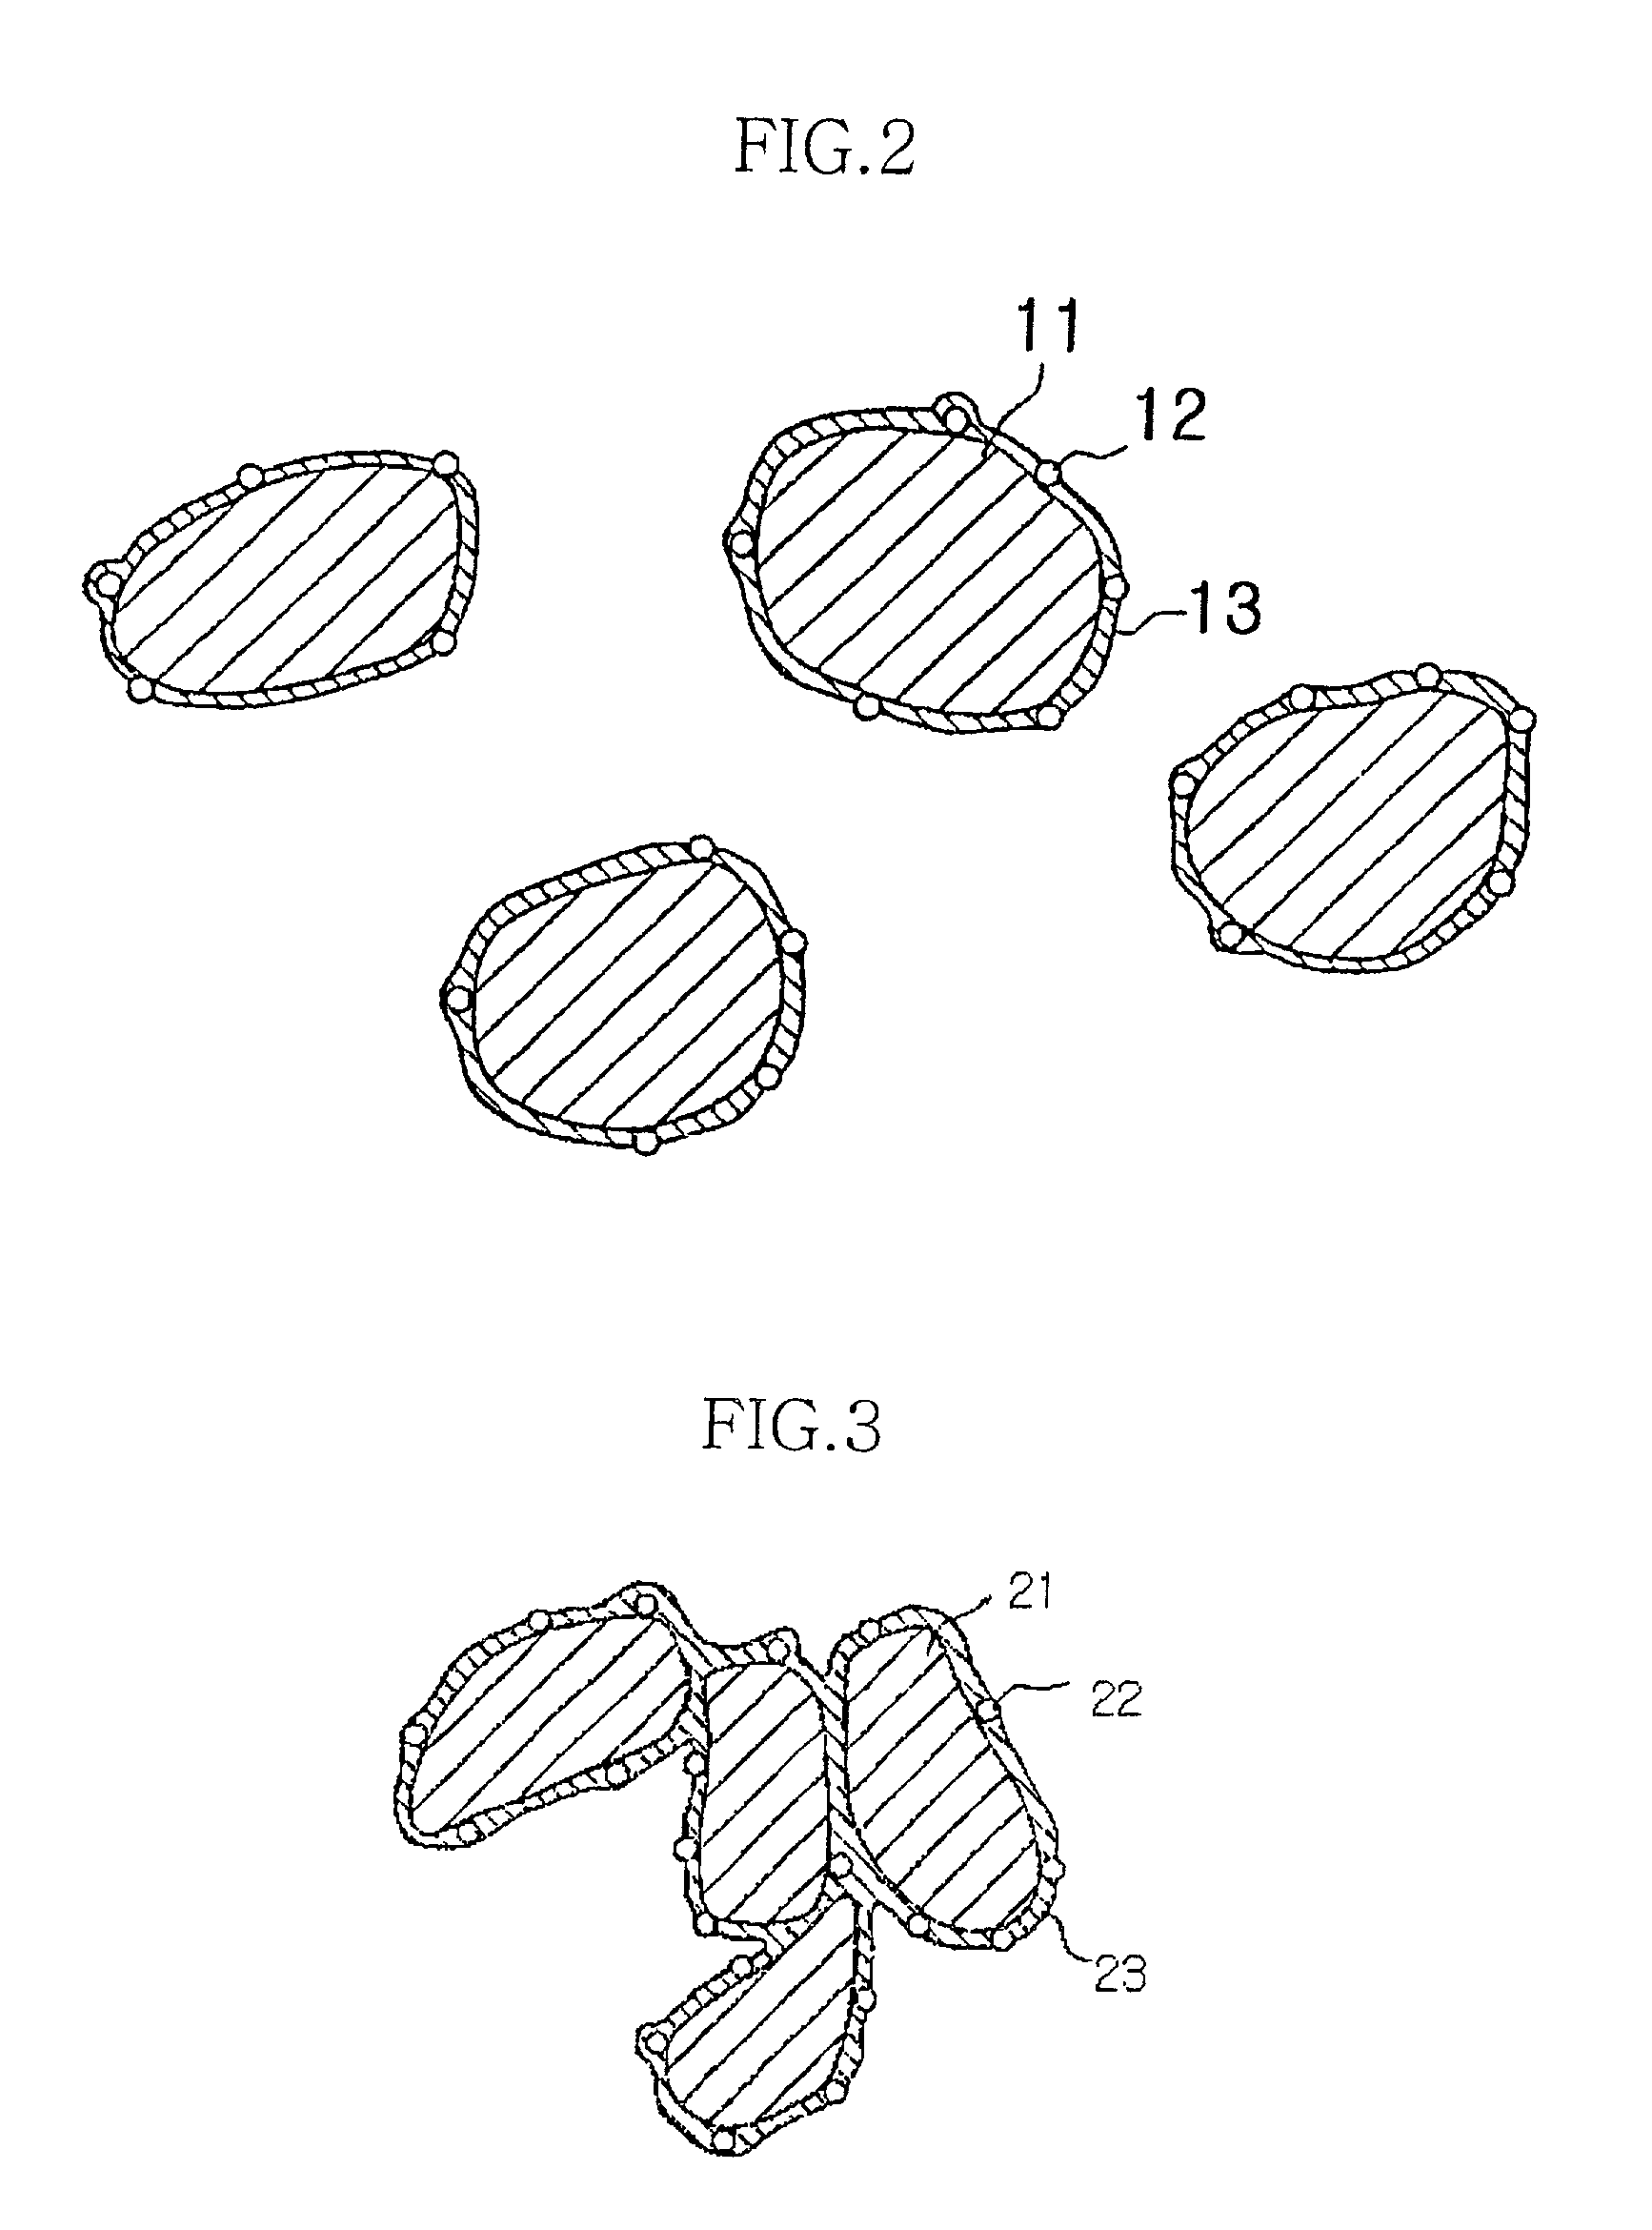 Negative active material for rechargeable lithium battery and method of preparing same